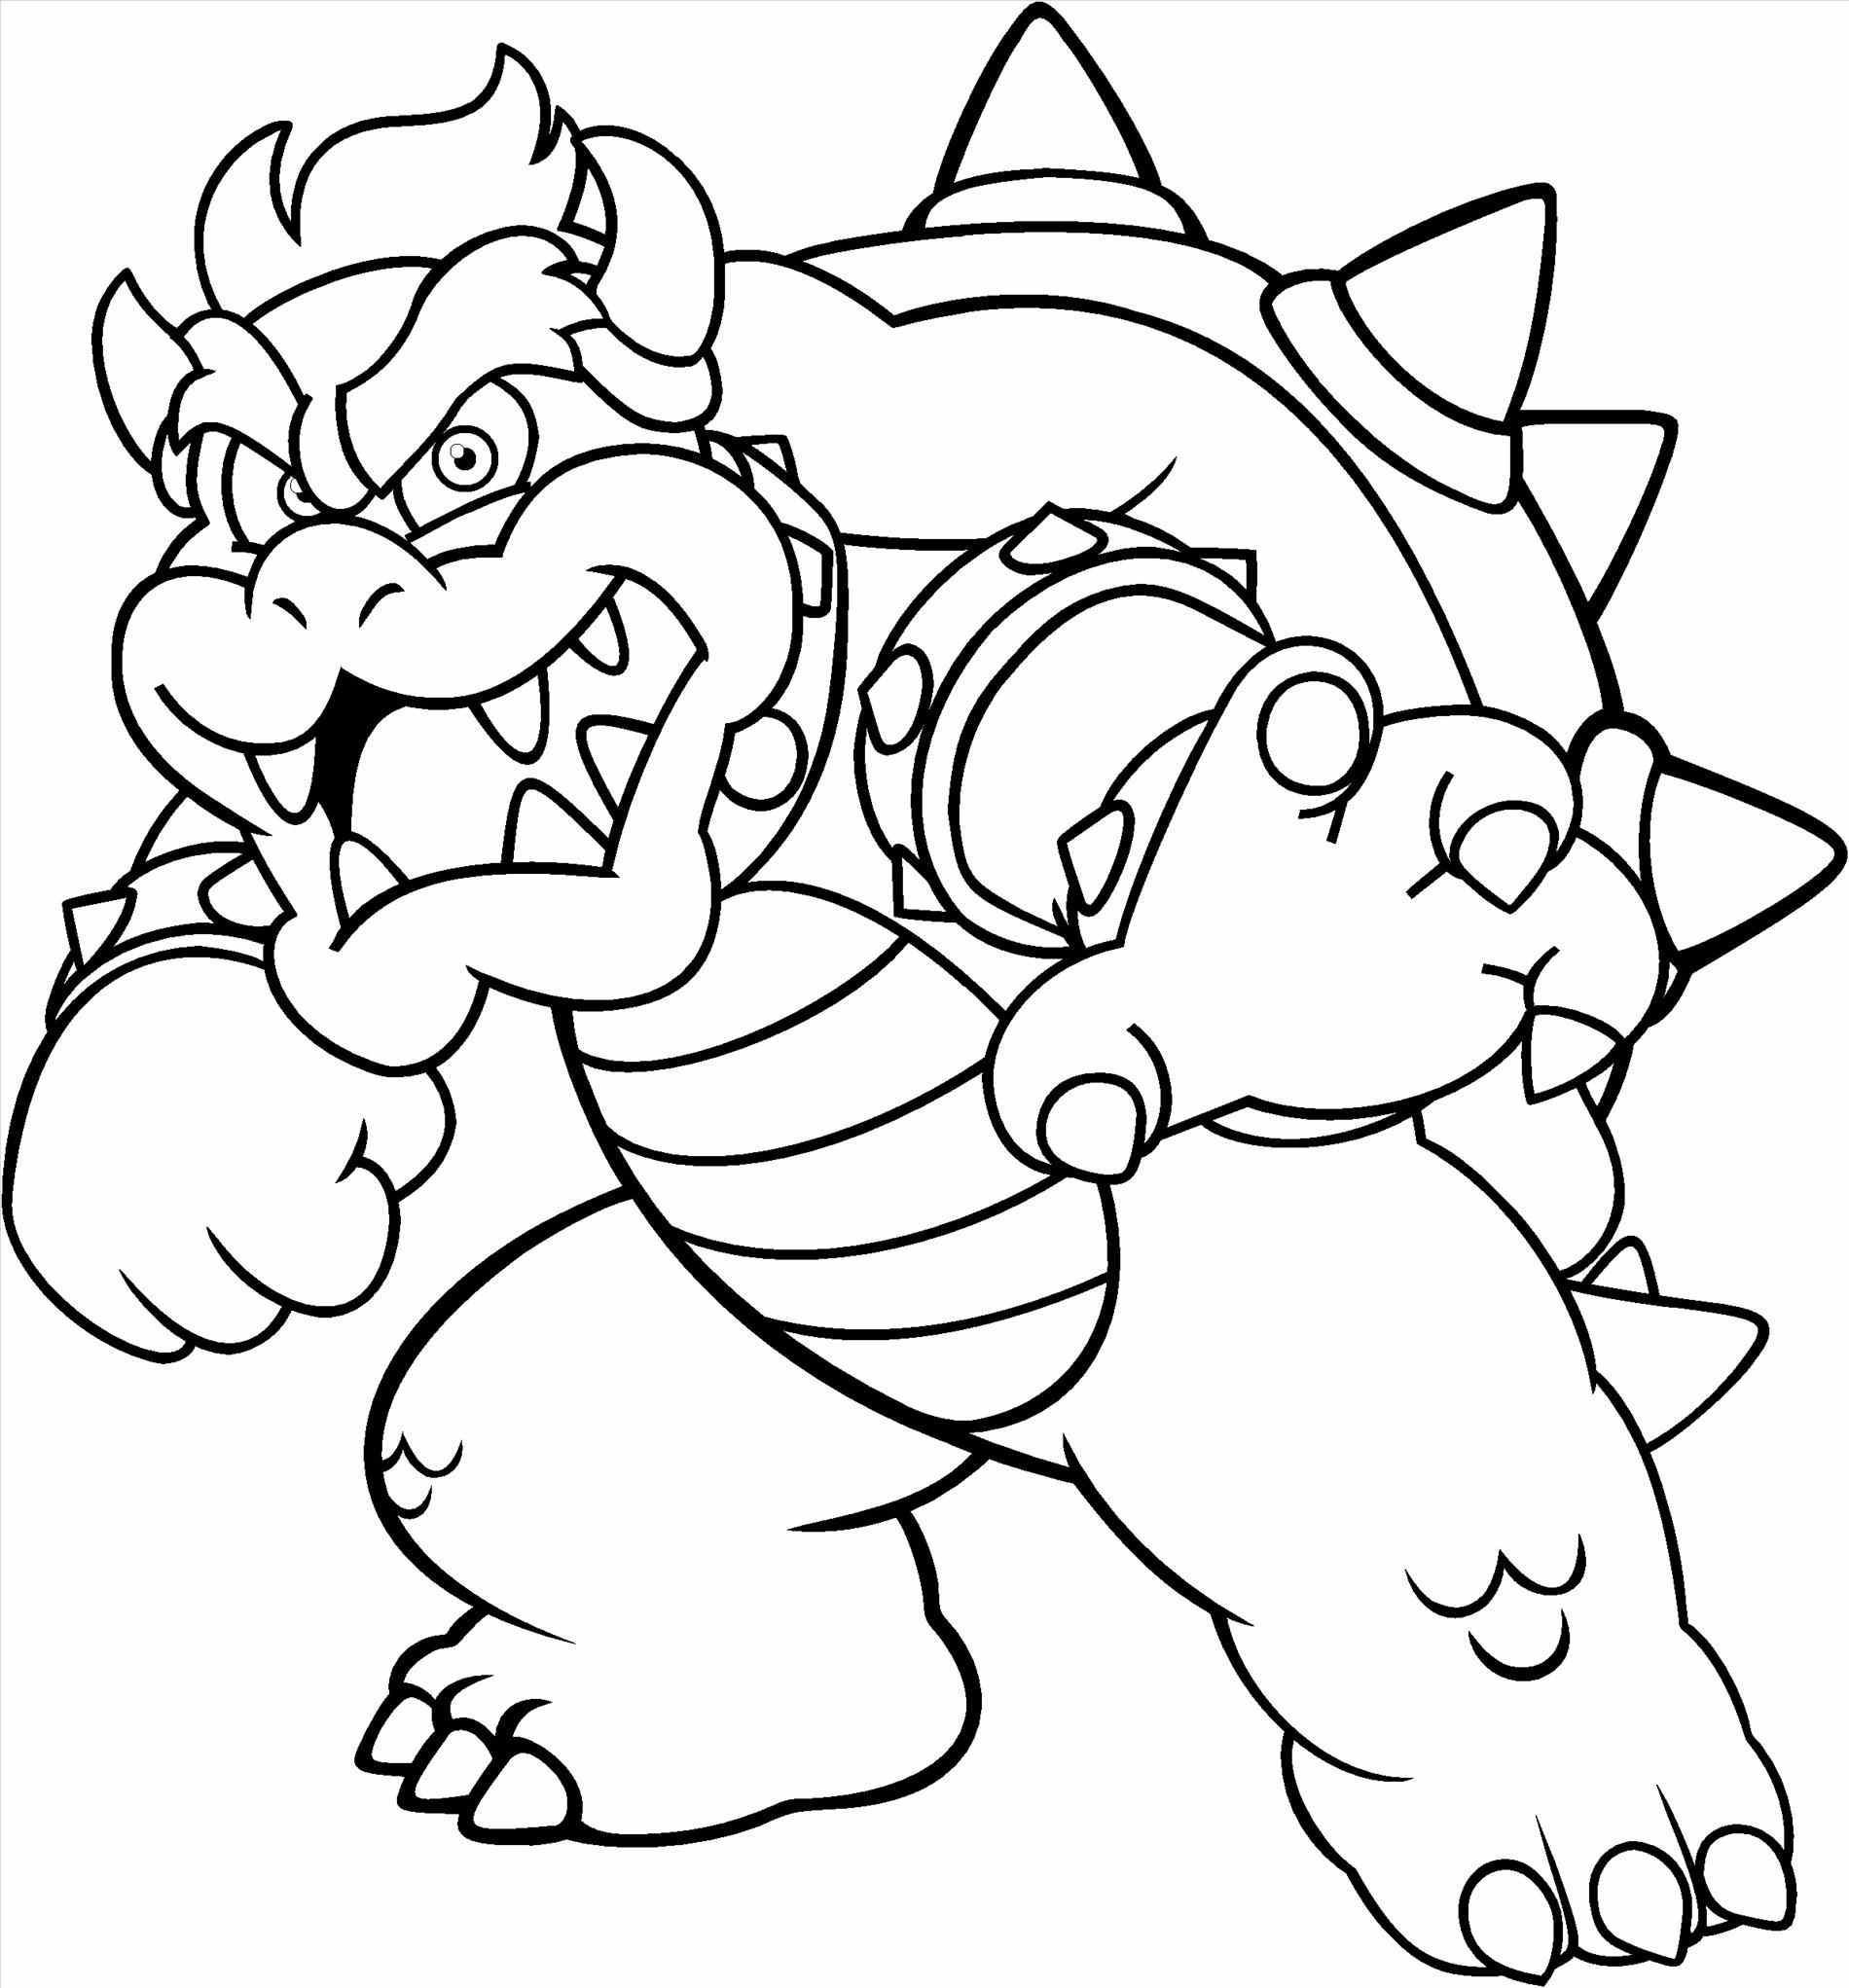 Nintendo Switch Coloring Pages - Coloring Home.